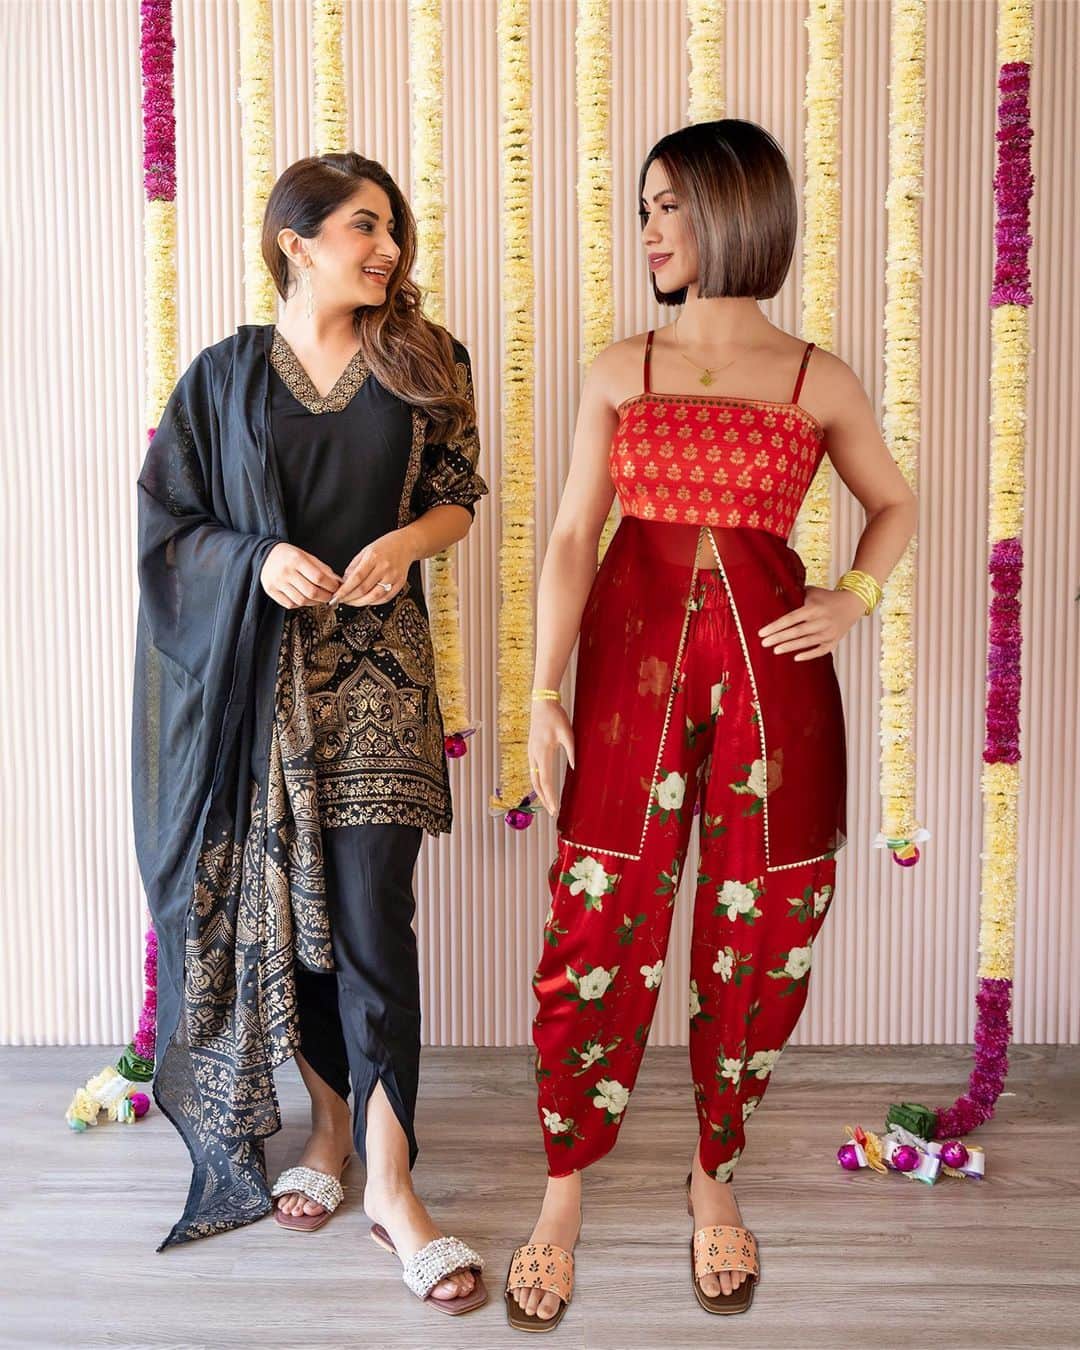 Aashna Shroffのインスタグラム：「@maya_unlimited and I got our festive looks ready with  Myntra’s Big Fashion Festival, have you? 🎉🎊   @maya_unlimited graces the occasion in an exquisite Floral Embroidered Top paired with Dhoti Pants, a masterpiece from @houseofmasaba, available on @myntra🌹 Get her look using product ID - 21016000.  I'm elegantly adorned in a Foil Print Kurta combined with Dhoti Pants & Dupatta, all courtesy of Sangria on @myntra✨ Shop my ensemble with product ID - 23307286.  Get shopping at Myntra’s Big Fashion Festival - LIVE NOW - for the latest trending fashion, international brands, festive selections, and much more, at 50% to 90% off🎉🛒  #MyntraBIGFashionFestival #DressUpWithMyntra #DressUpSeason #MyntraBFF2023 #MyntraBFFisLIVE #MayaForMyntra #Maya #MyntraBFFfestivetrendspotlight23 #ad」